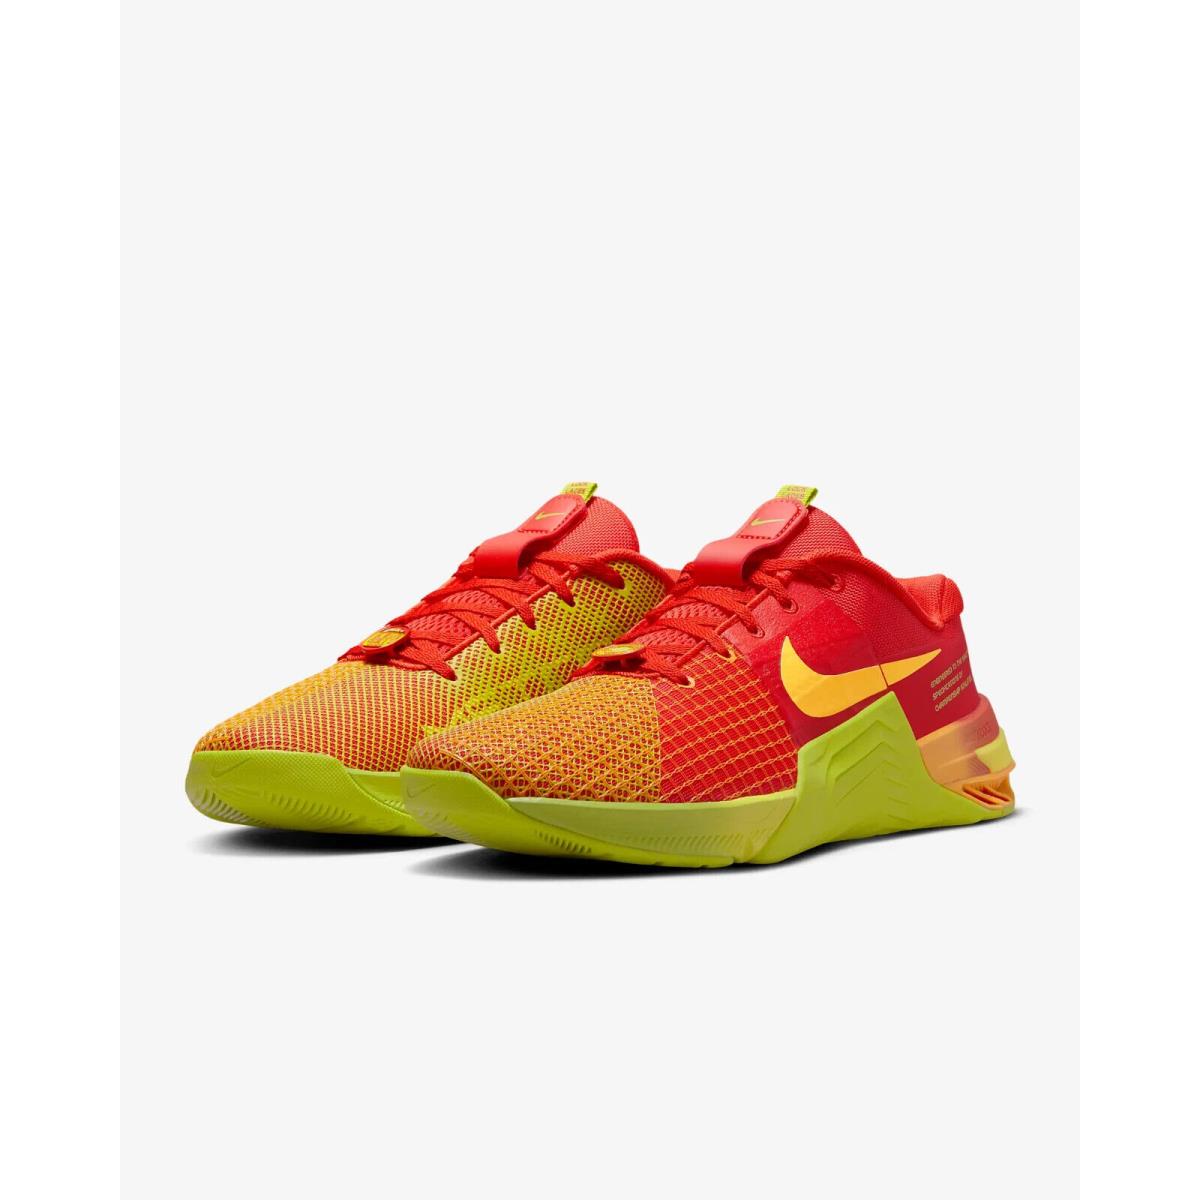 Nike shoes Metcon - Red 0